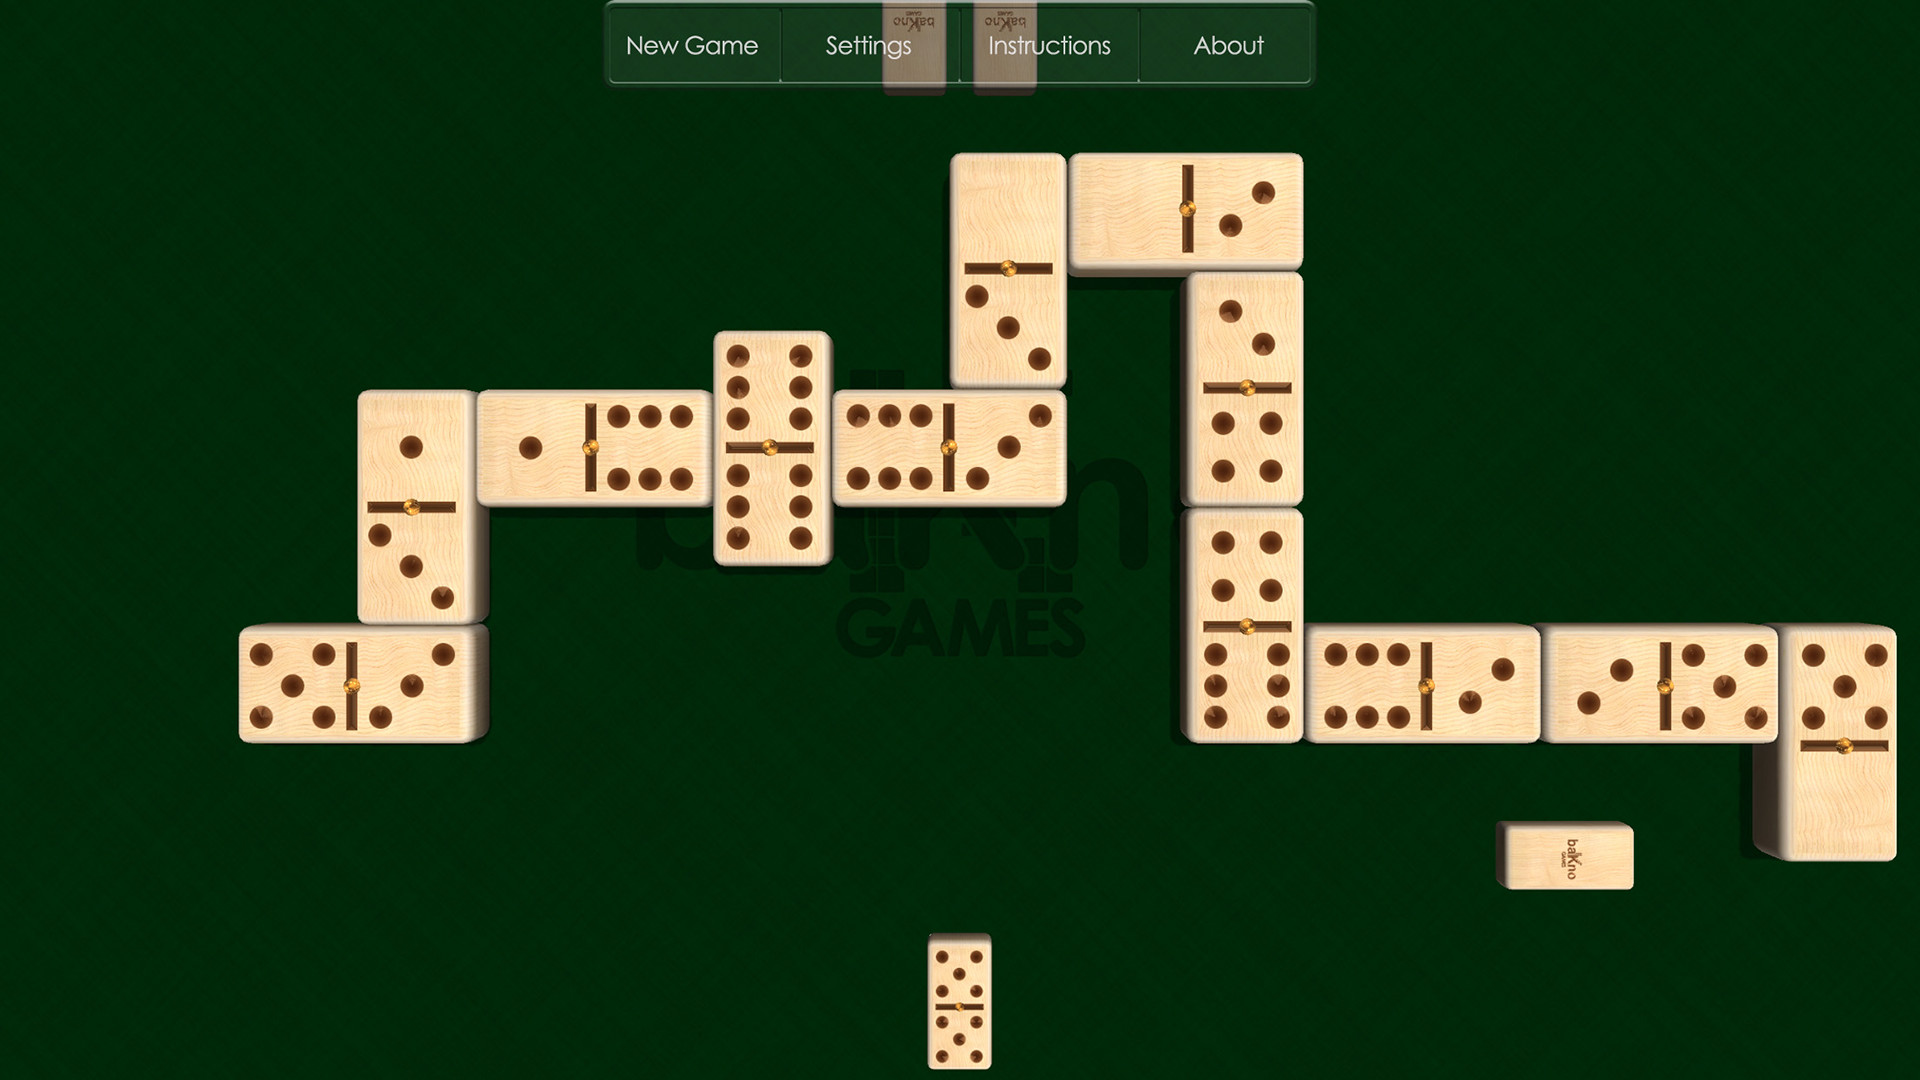 Domino Multiplayer for android download